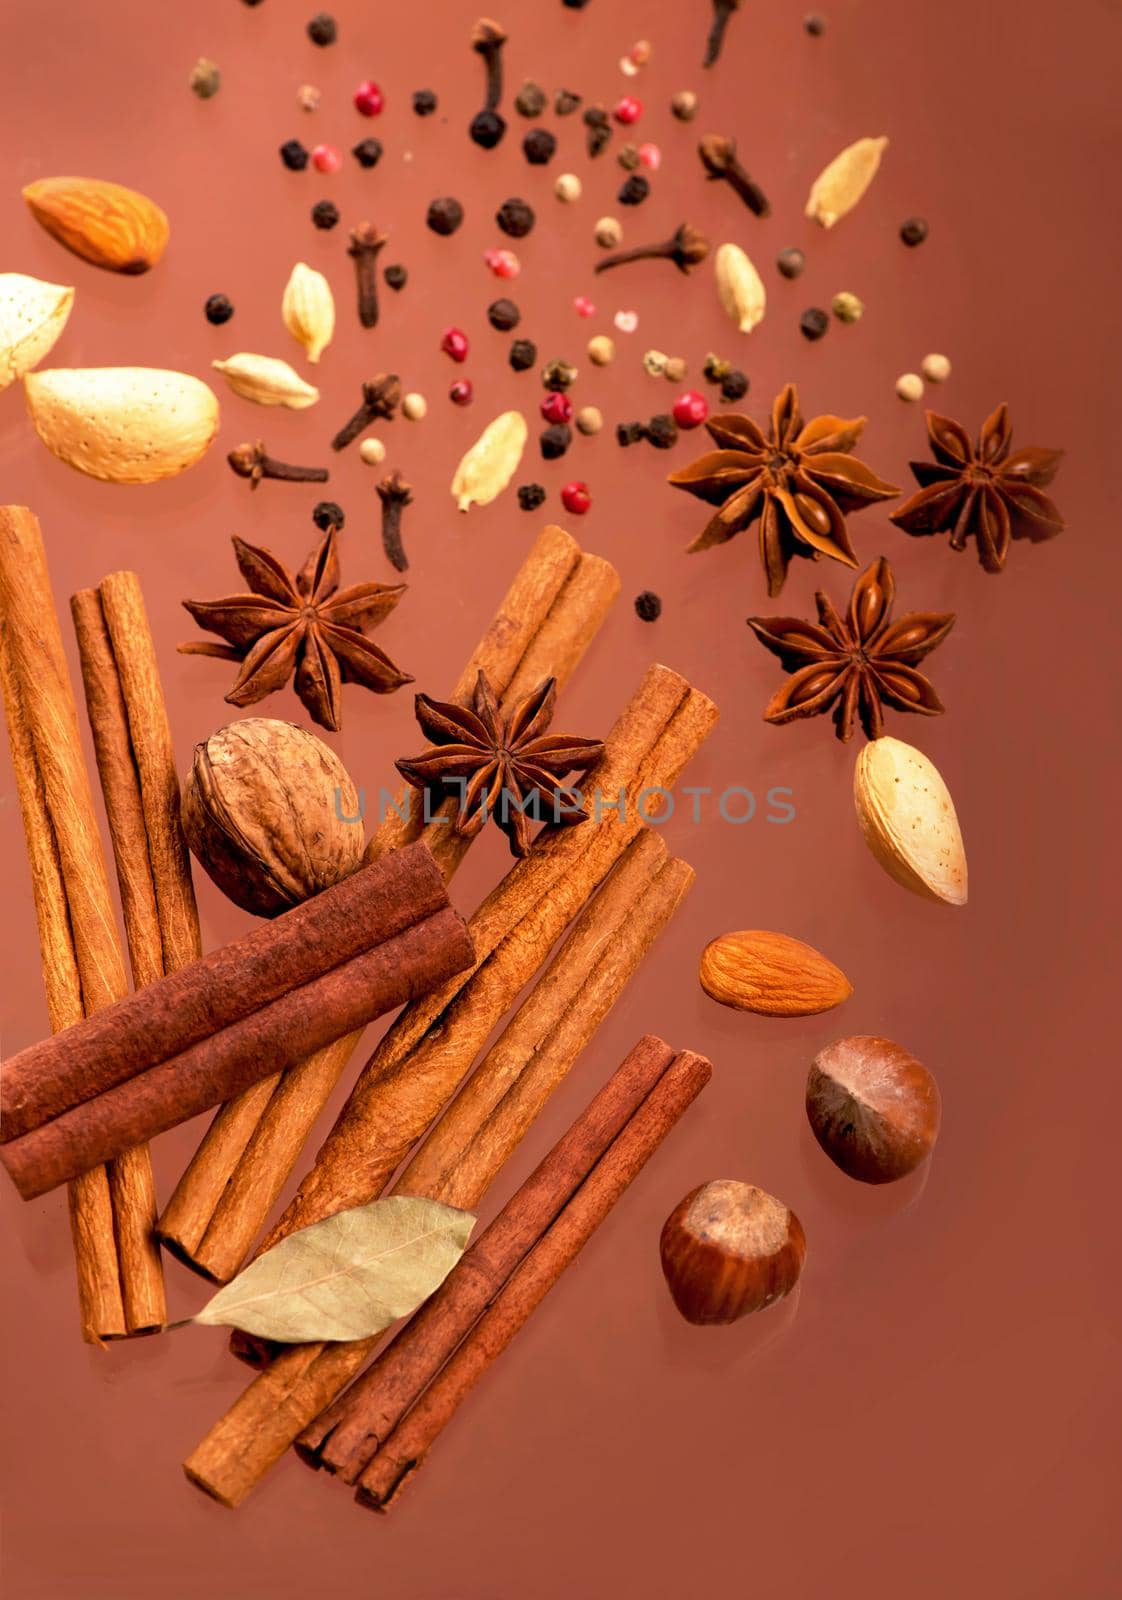 Traditional Christmas spices - Star anise with cinnamon and cloves on dark rustic wooden background by aprilphoto